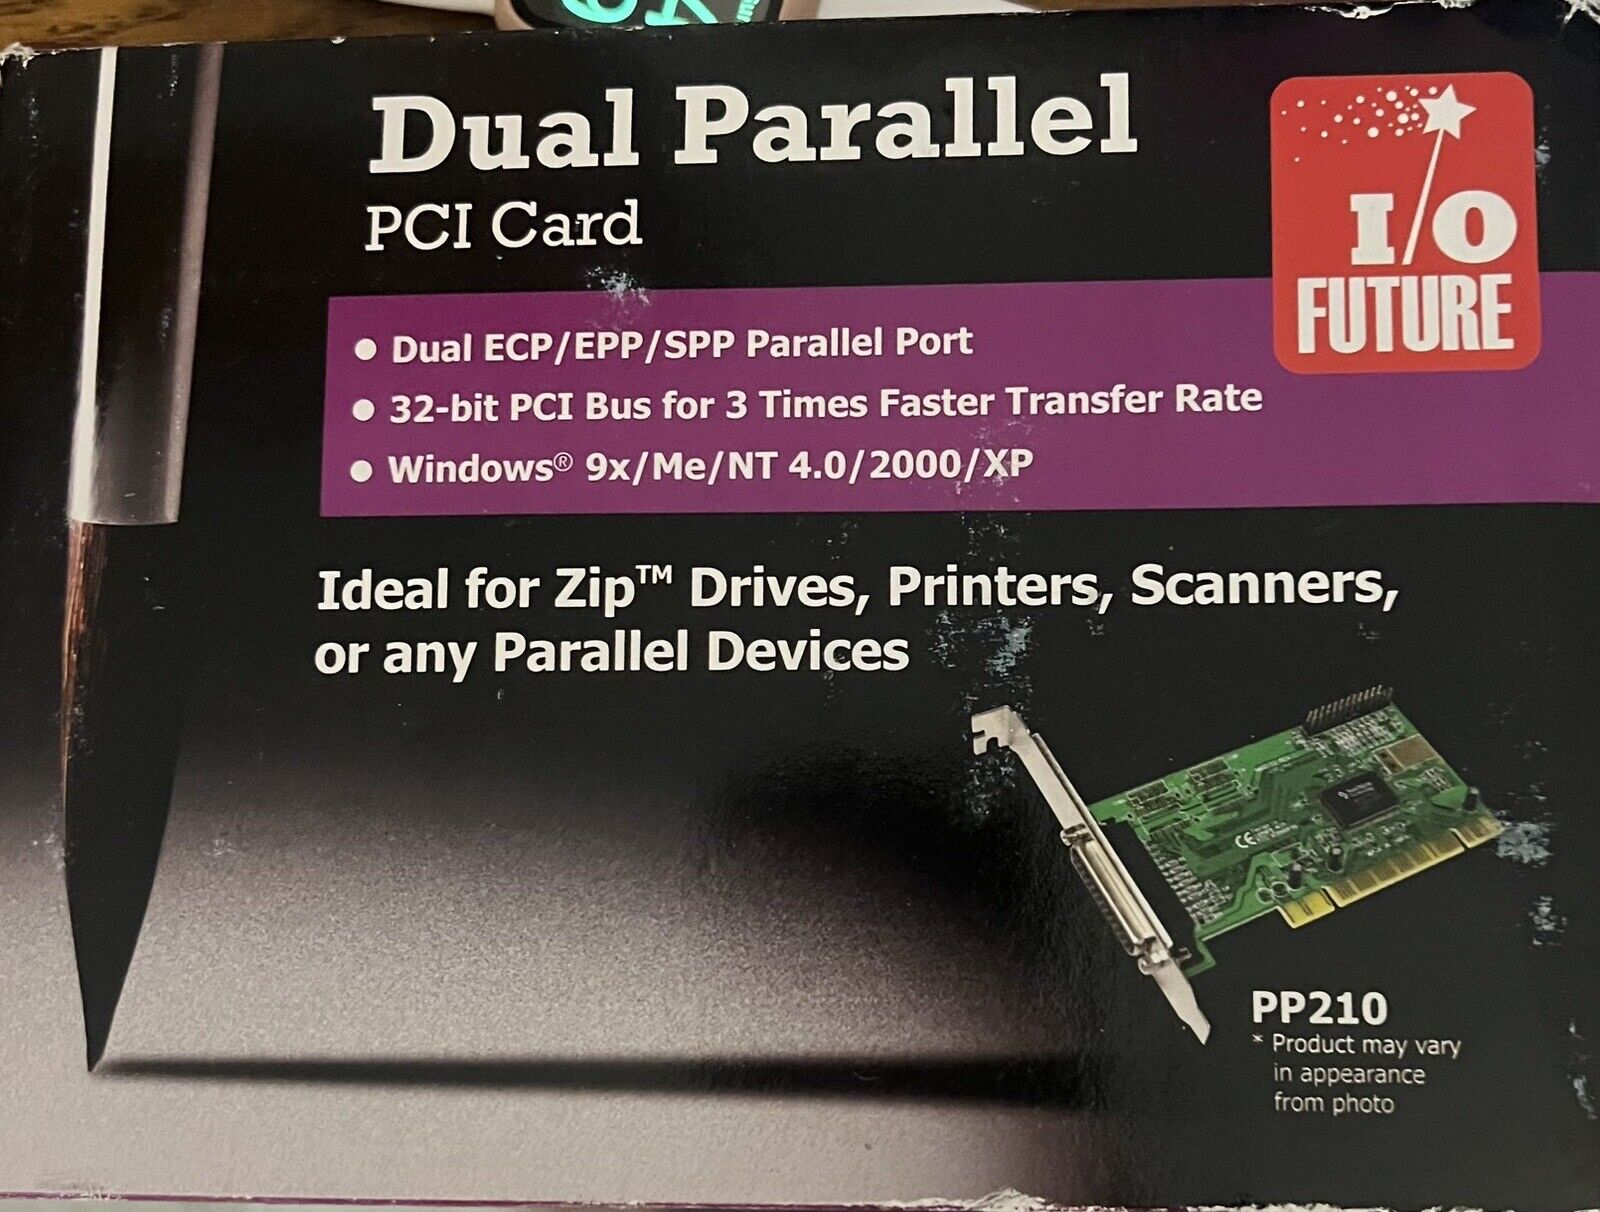 Dual Parallel PCI Card